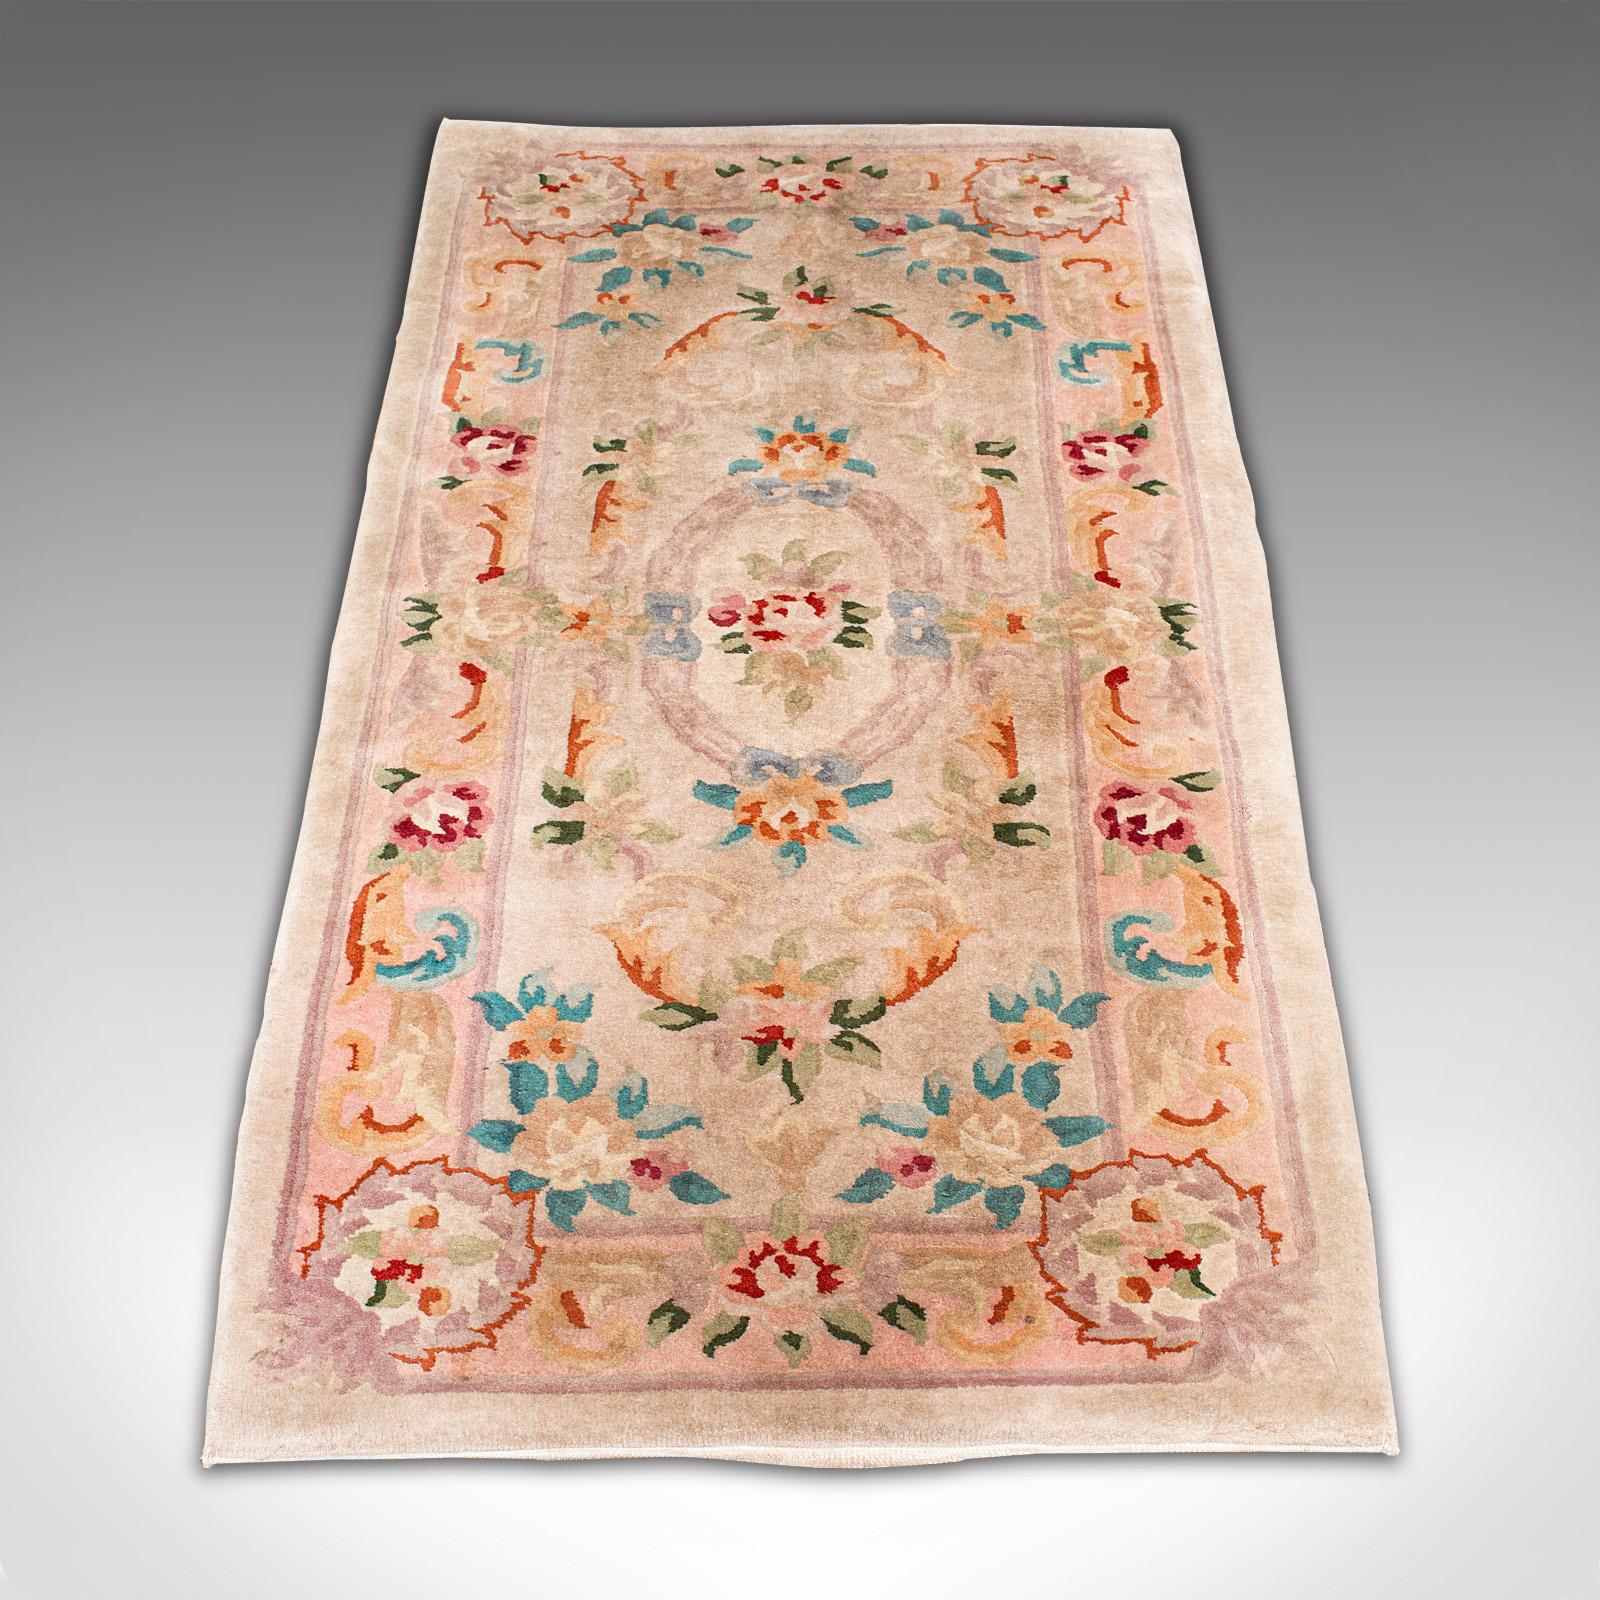 This is a vintage hallway rug. An oriental, quality woven decorative carpet, dating to the late 20th century, circa 1970.

Generously sized for the entrance hall at 76.5cm x 155cm (30